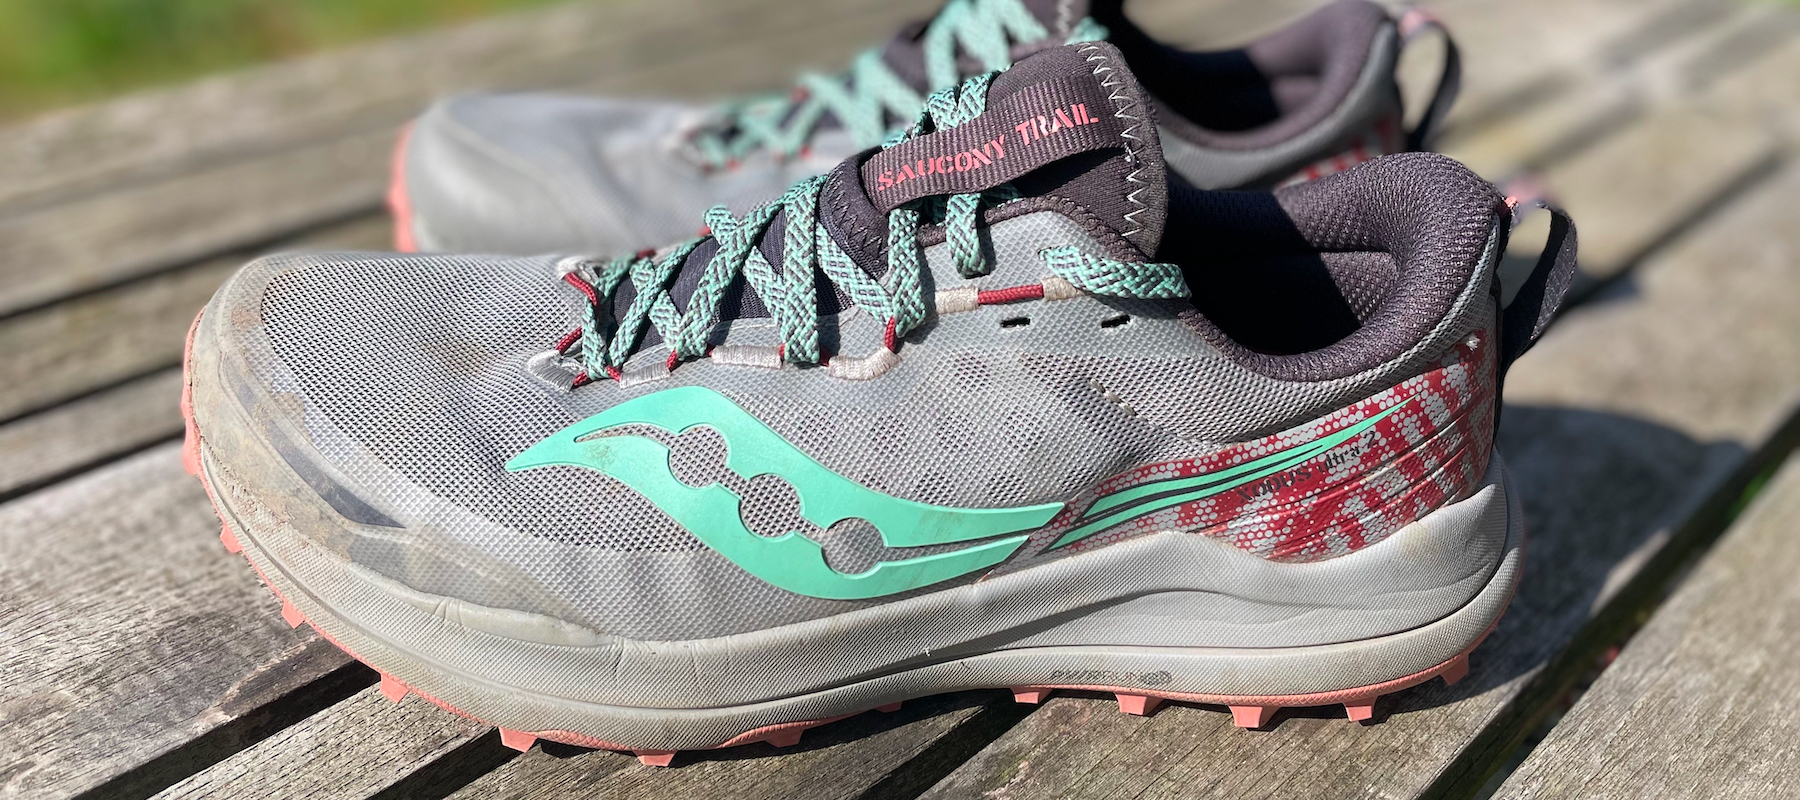 Saucony Xodus Ultra 2 trail running shoes review: a…